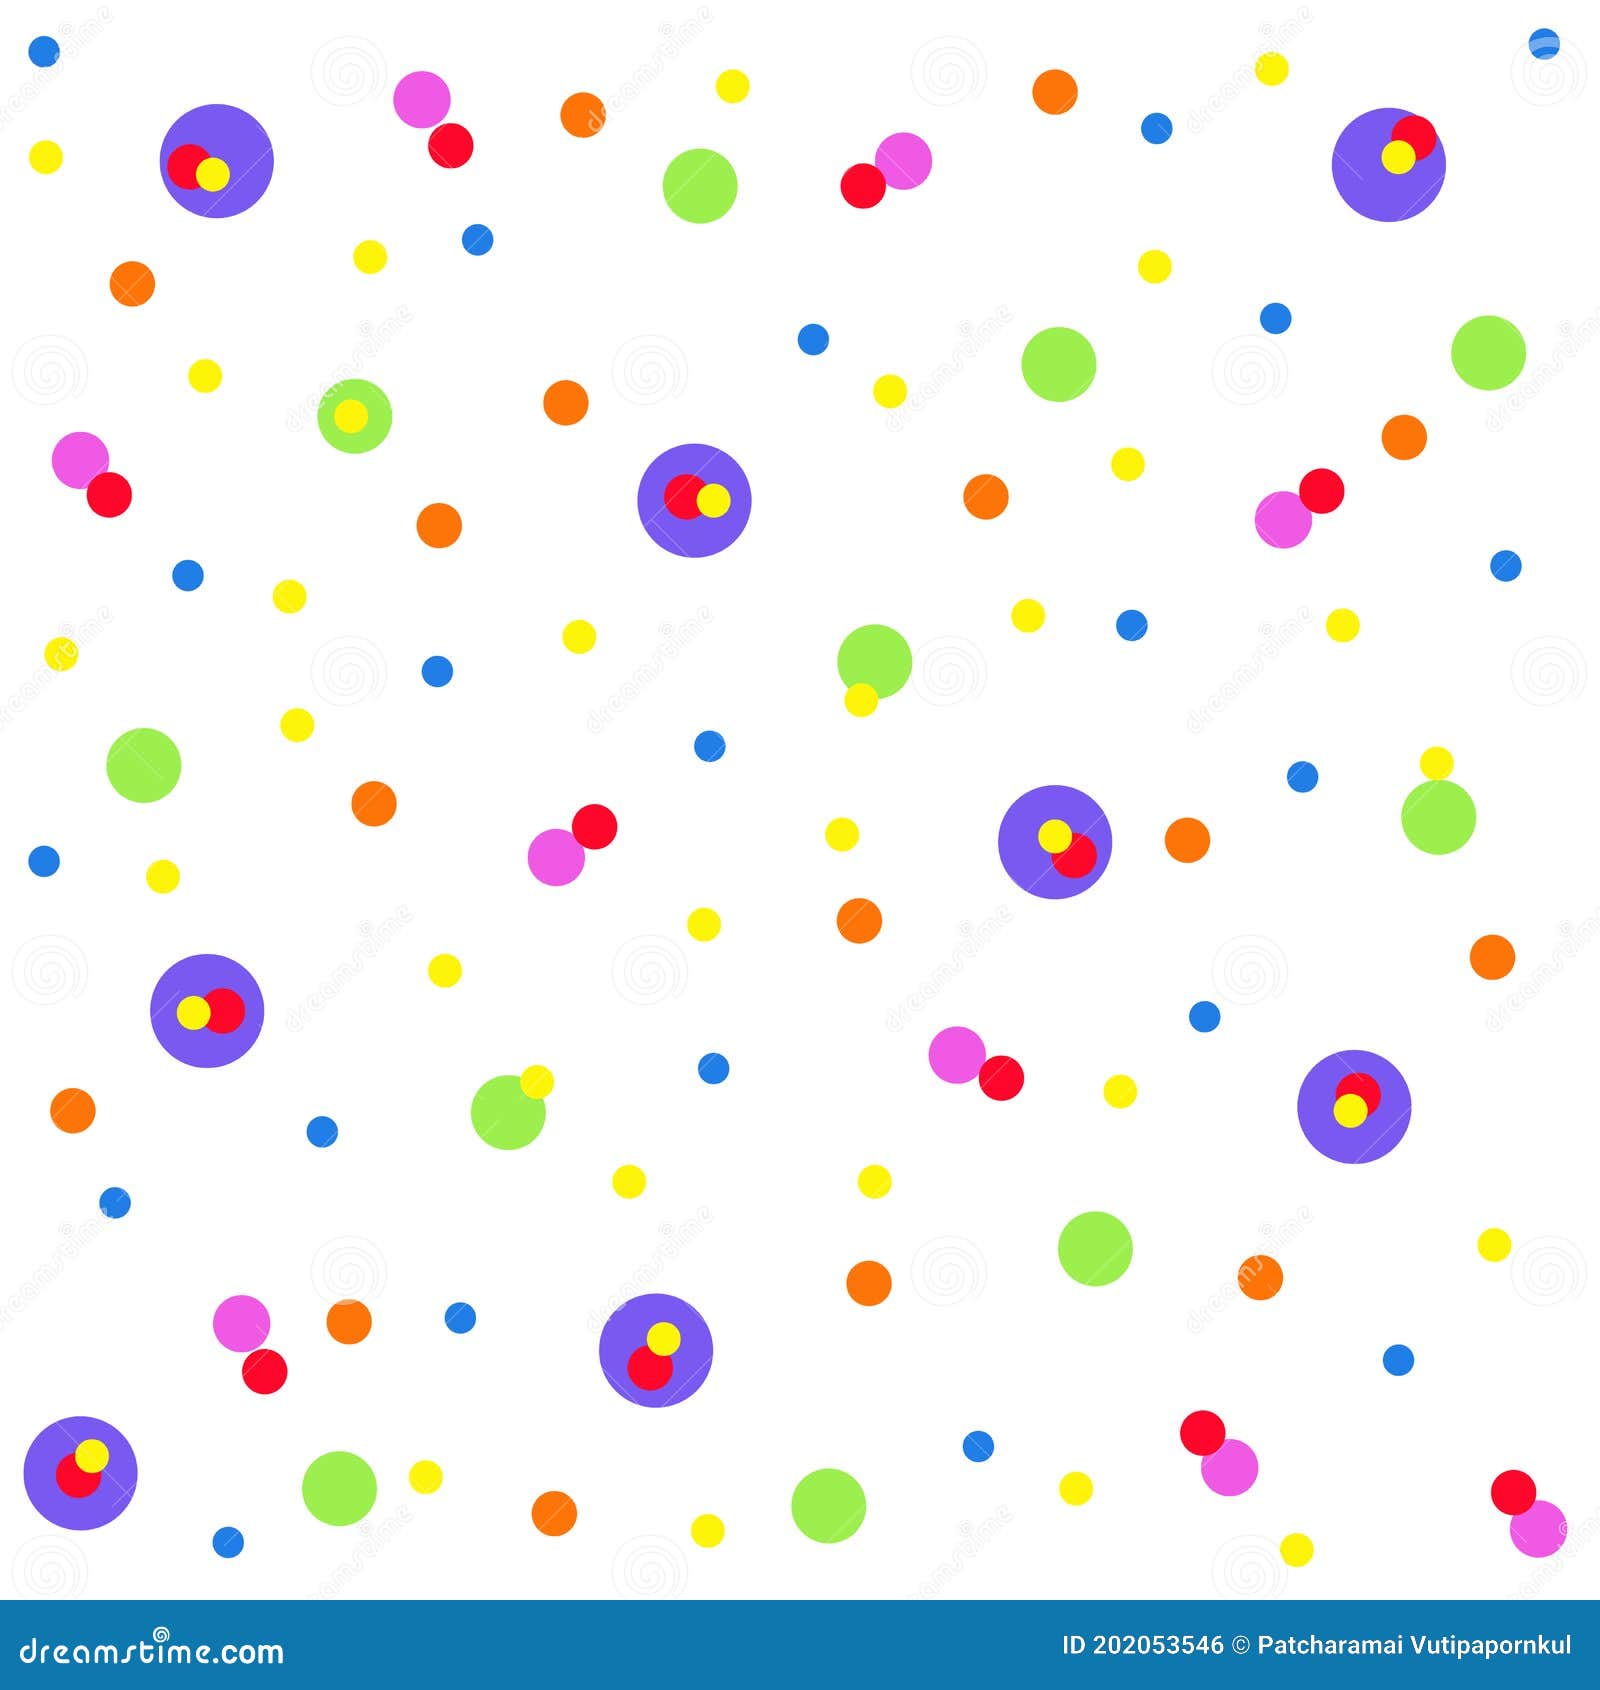 Grainy Polka Dot Picture Several Colors Spread on a White Background. Stock  Illustration - Illustration of drawing, number: 202053546